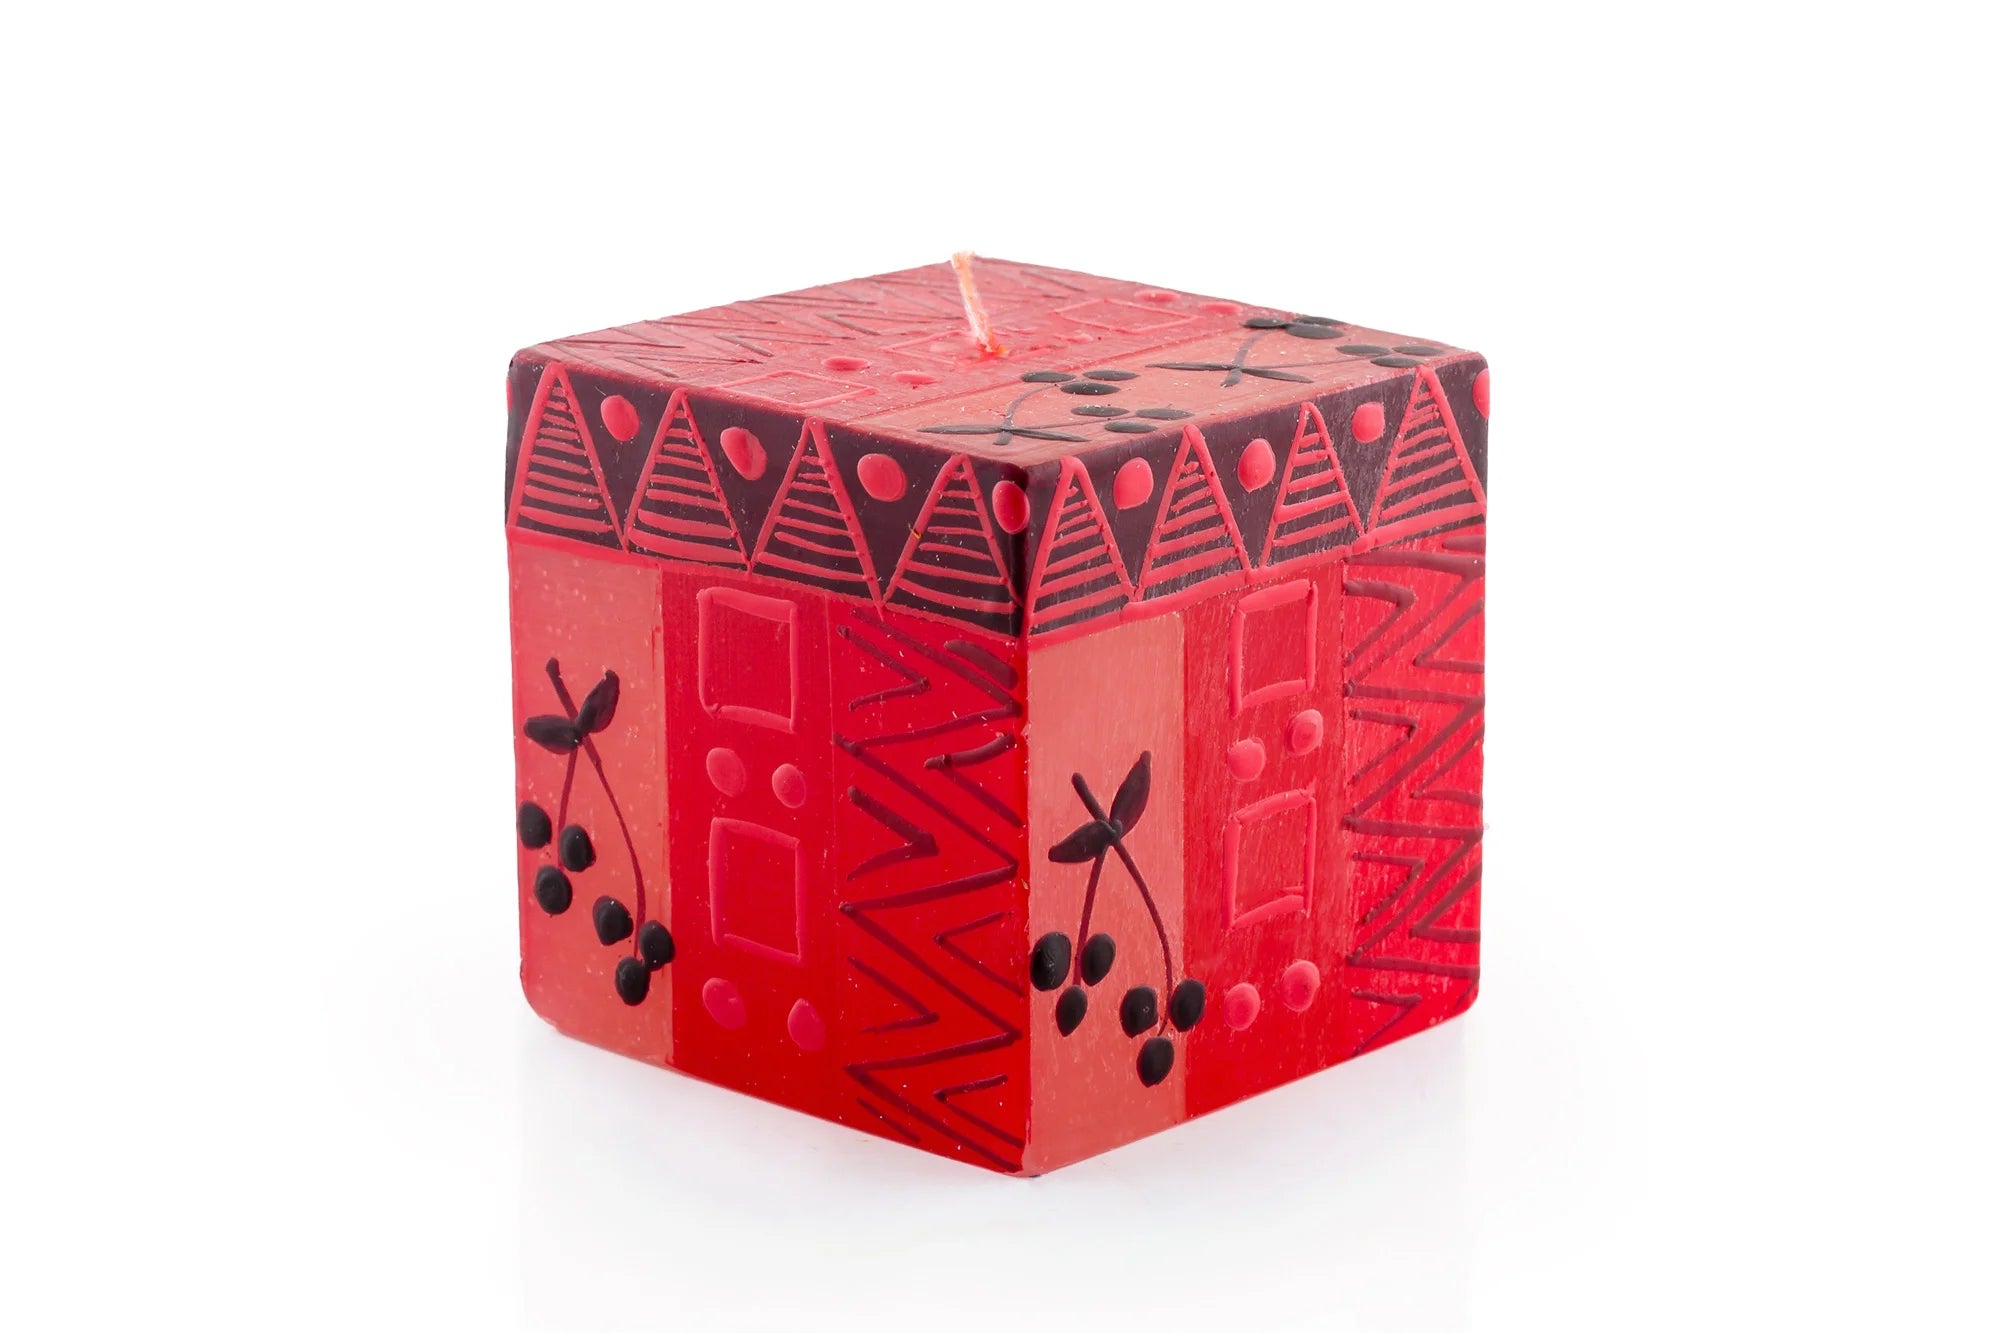 3" x 3" x 3" Berry Blaze cube candle. Bright red with darker berry design mixed with geometric design.